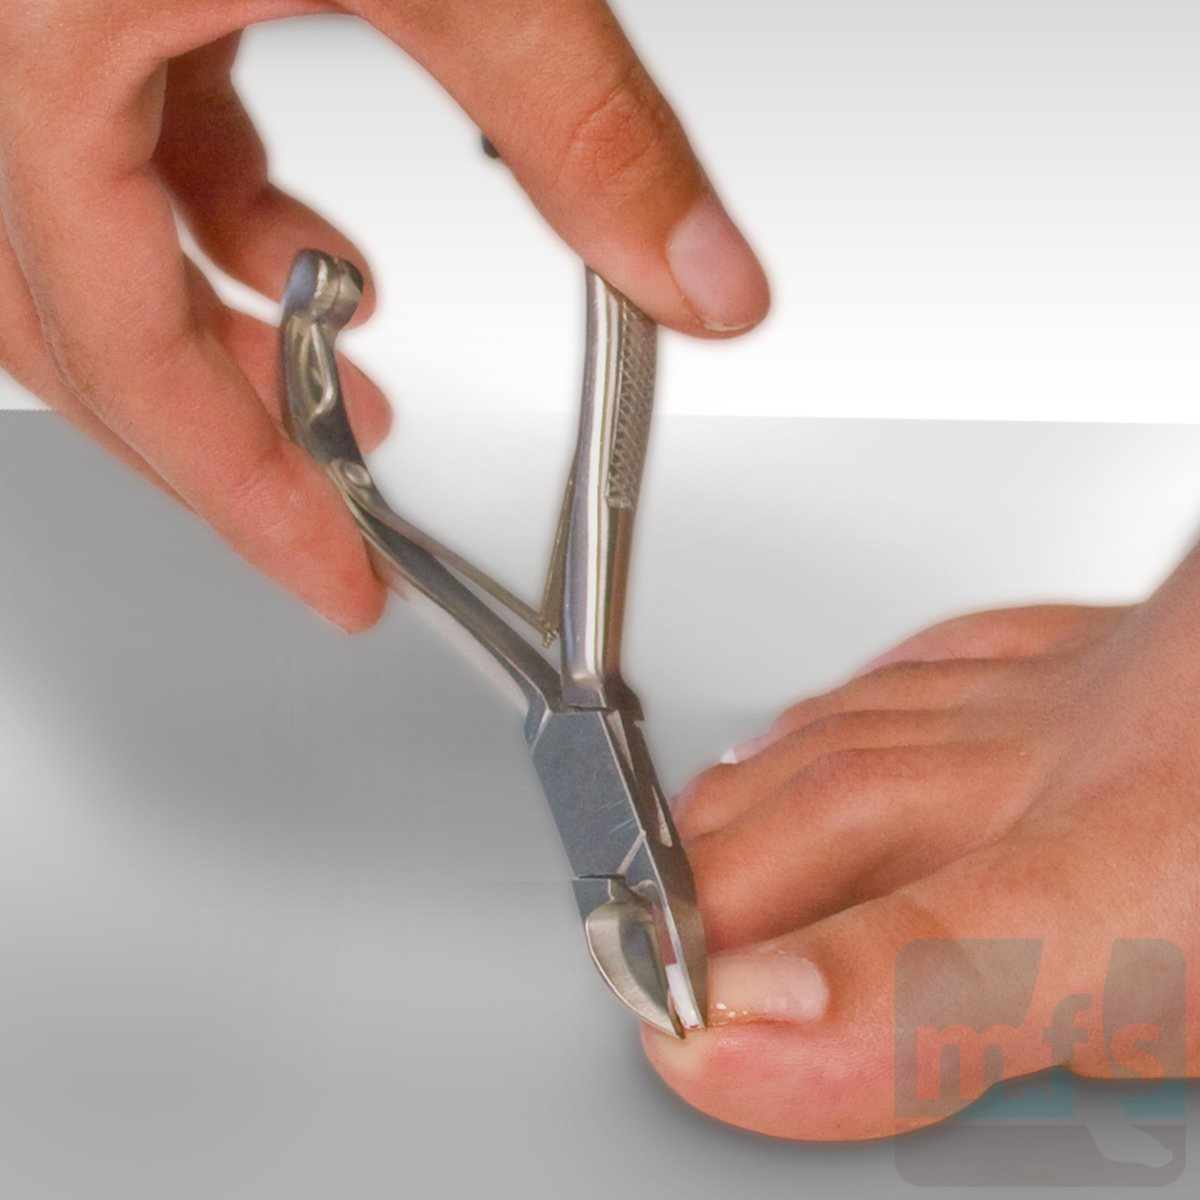 Toe Nail Clippers, Nail Clippers For Seniors Toe Nail Clippers